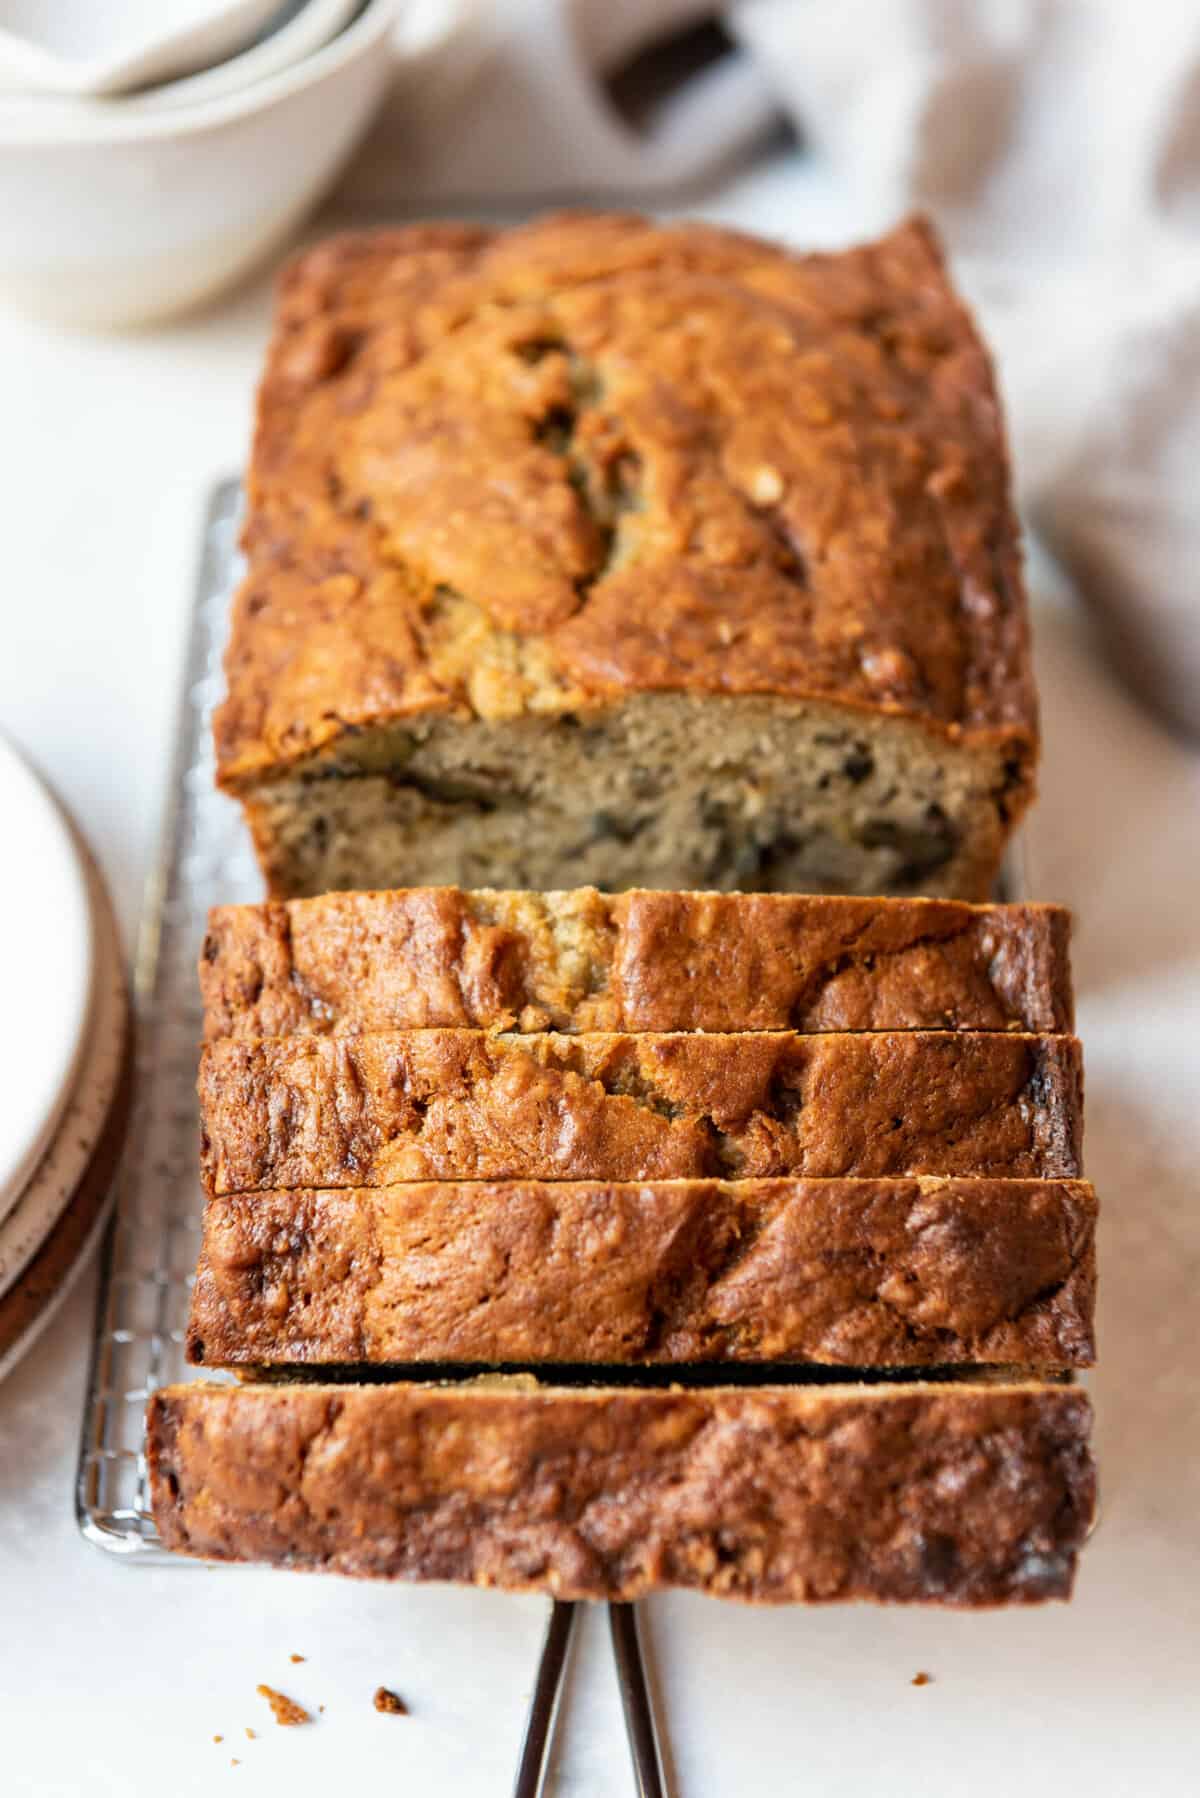 An image of a loaf of fresh, moist banana bread on a cutting board.